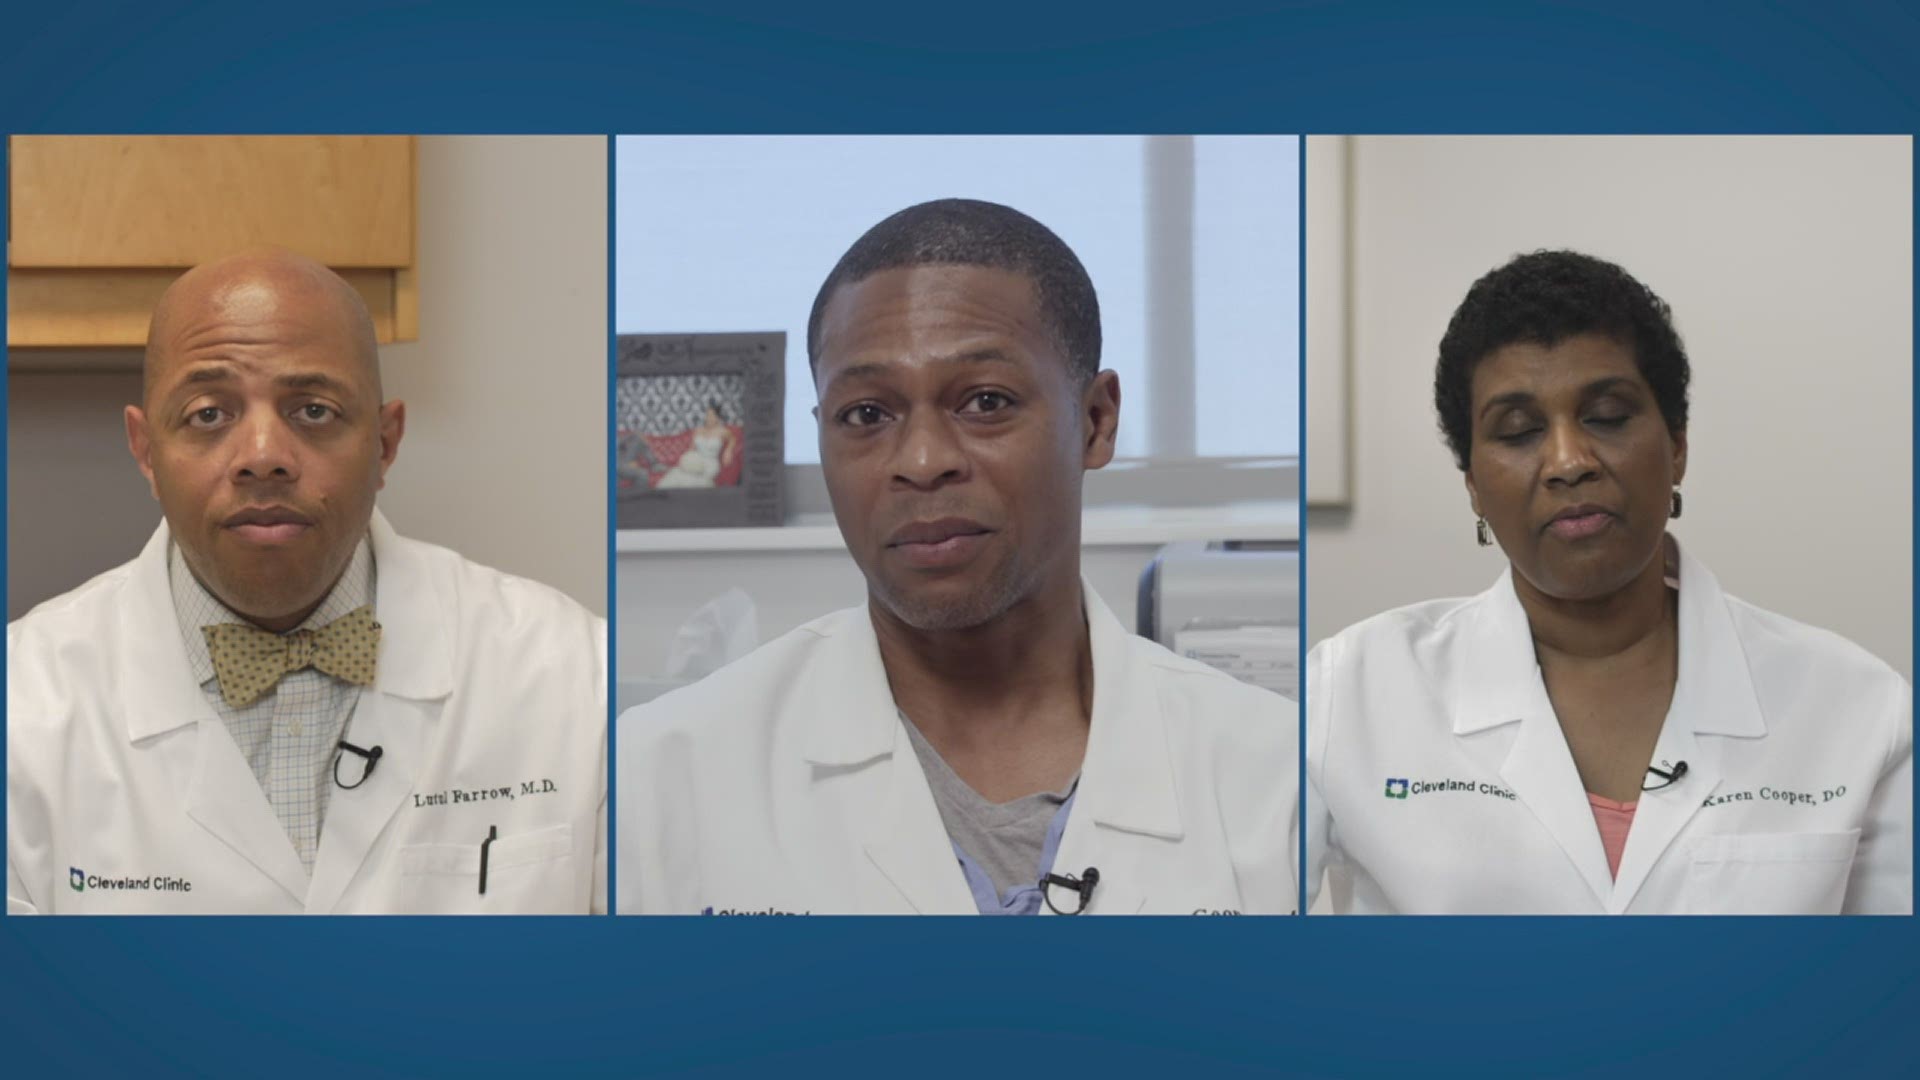 The PSA focuses on educating the public 'on yet another aspect of healthcare disparities that affect the African American population.'